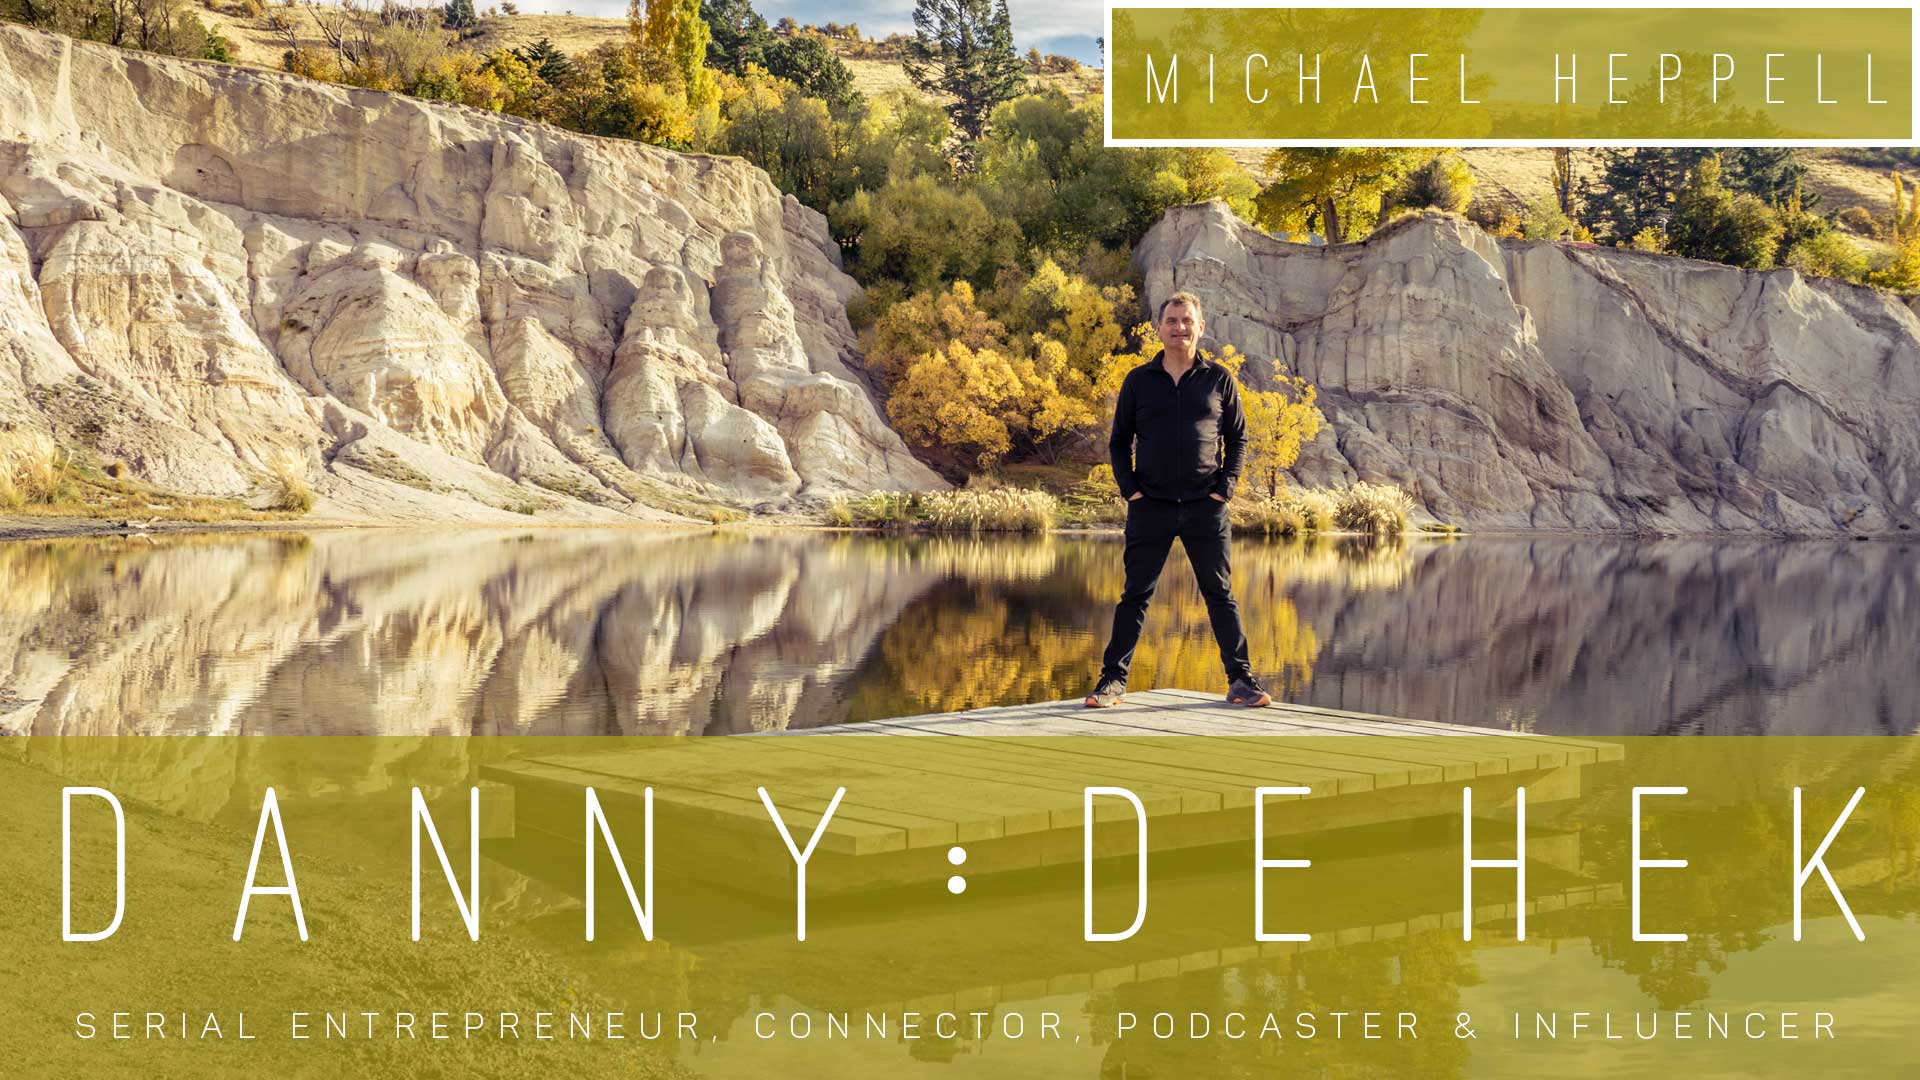 WHAT : DE HEK Podcast - 12 Questions with Michael Heppell